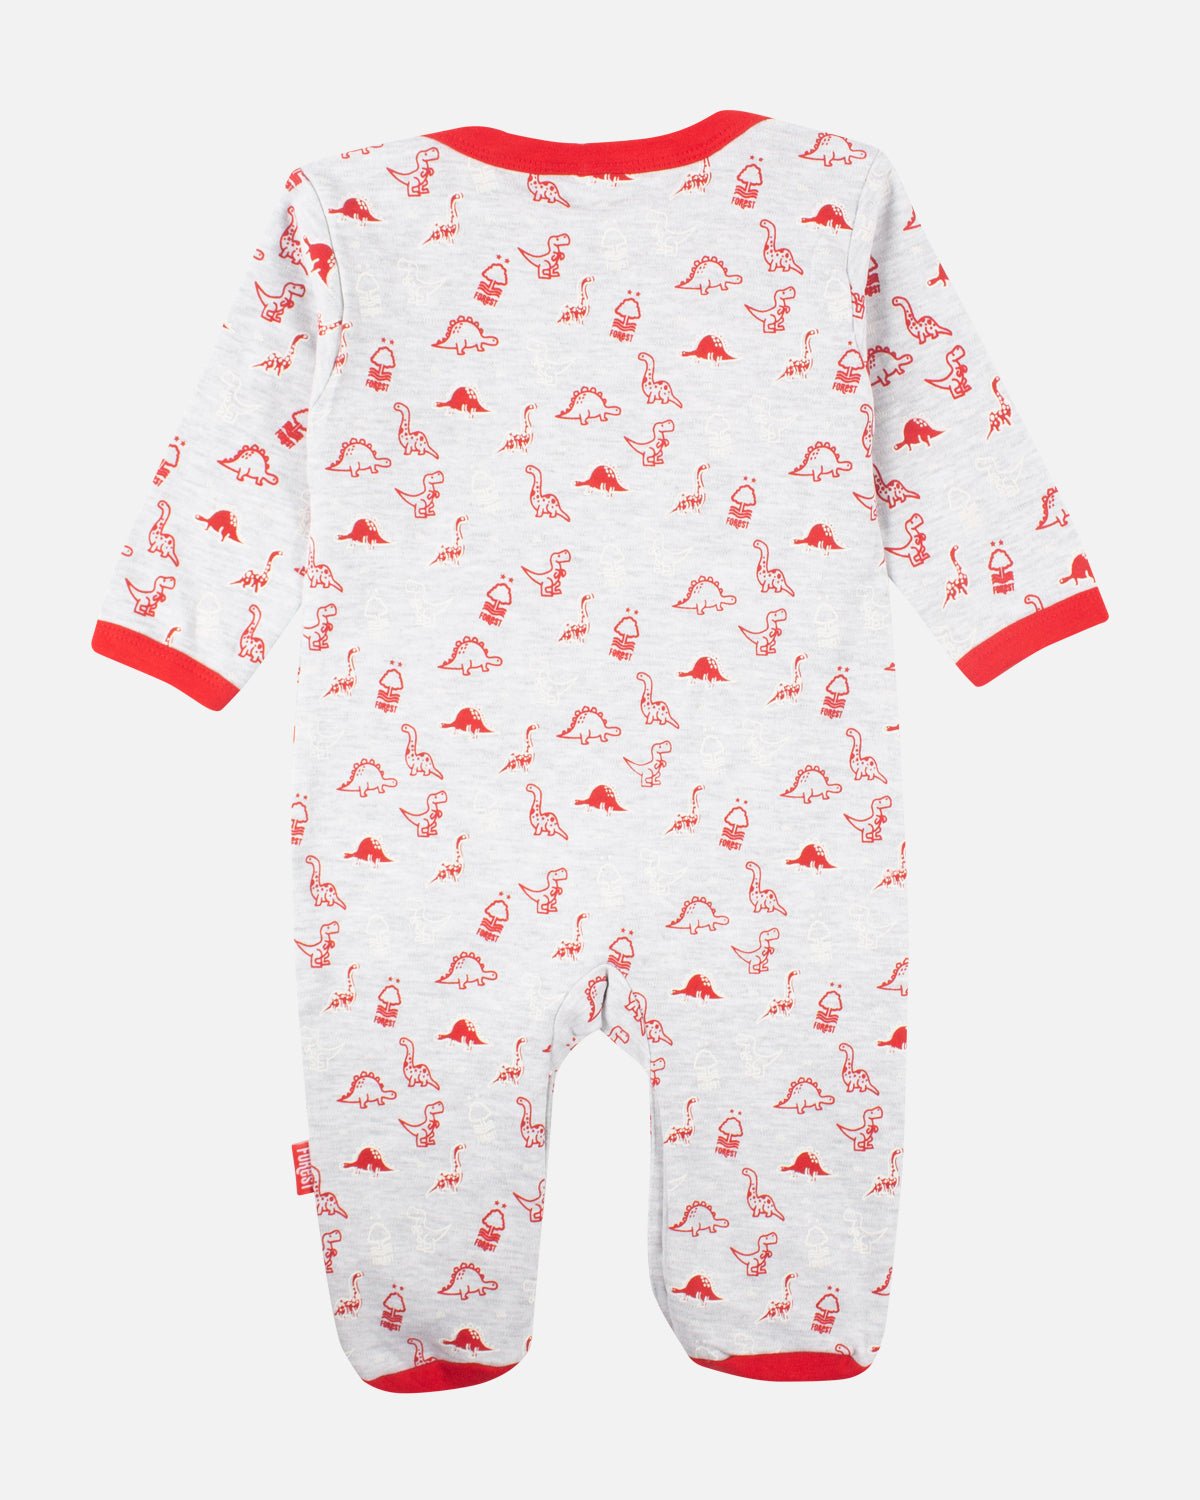 NFFC Dino Baby Sleepsuit - Nottingham Forest FC